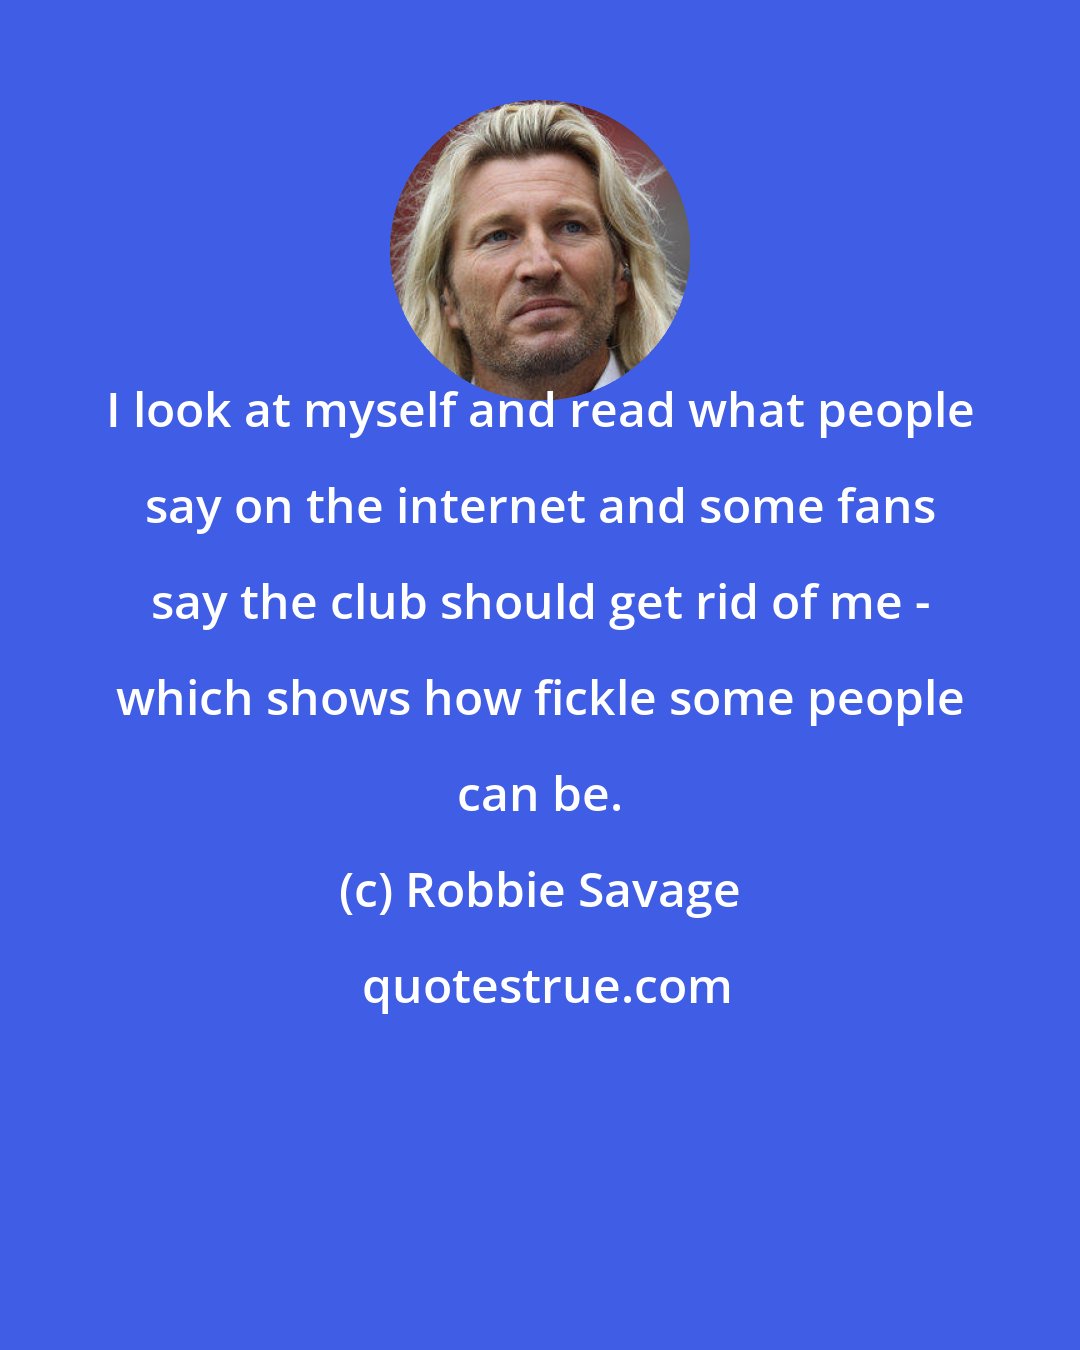 Robbie Savage: I look at myself and read what people say on the internet and some fans say the club should get rid of me - which shows how fickle some people can be.